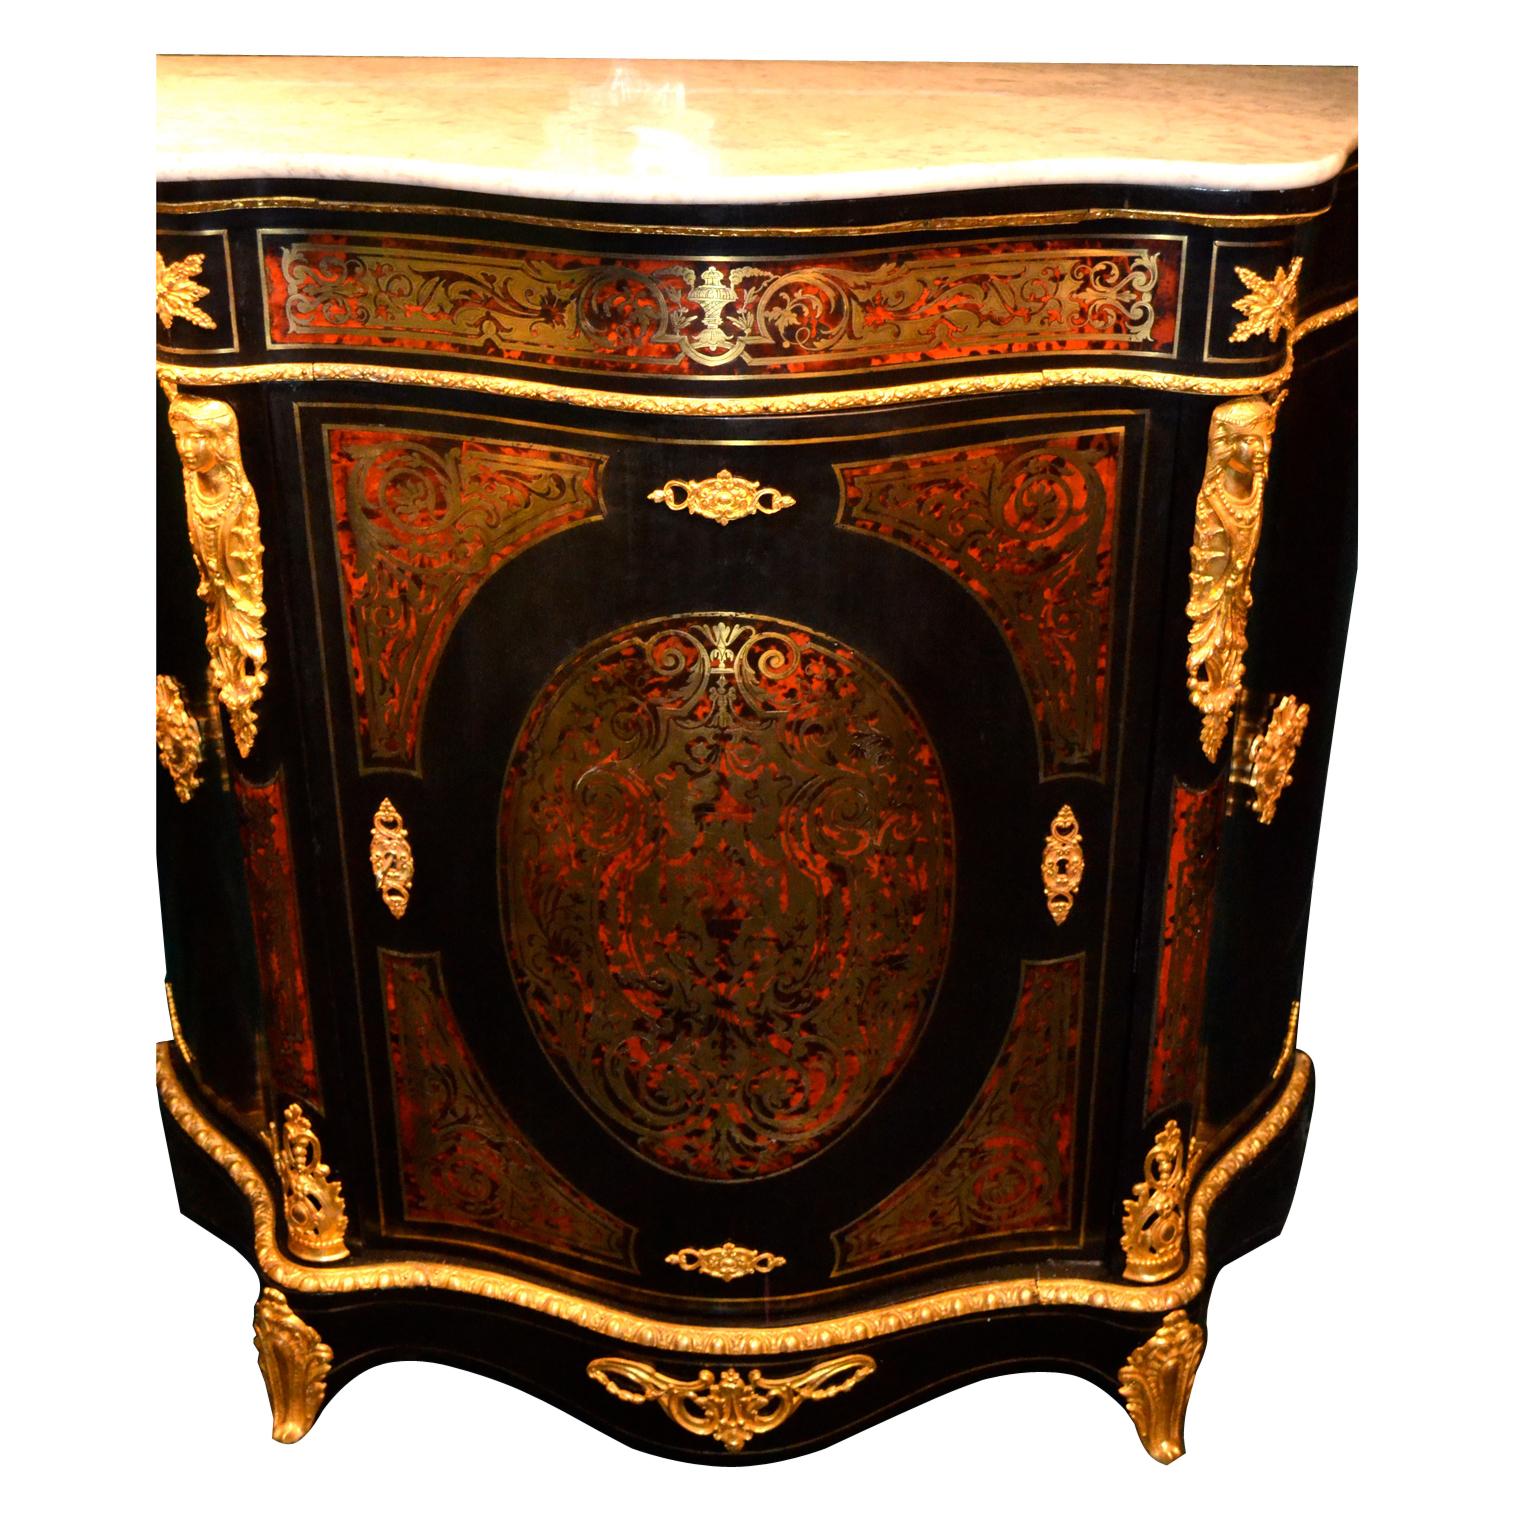 A period French Napoleon III serpentine form cabinet in ebonized wood with Boulle marquetry in brass and tortoiseshell, bronze ornaments, and conforming white marble top.  The mahogany interior has two shelves.




   